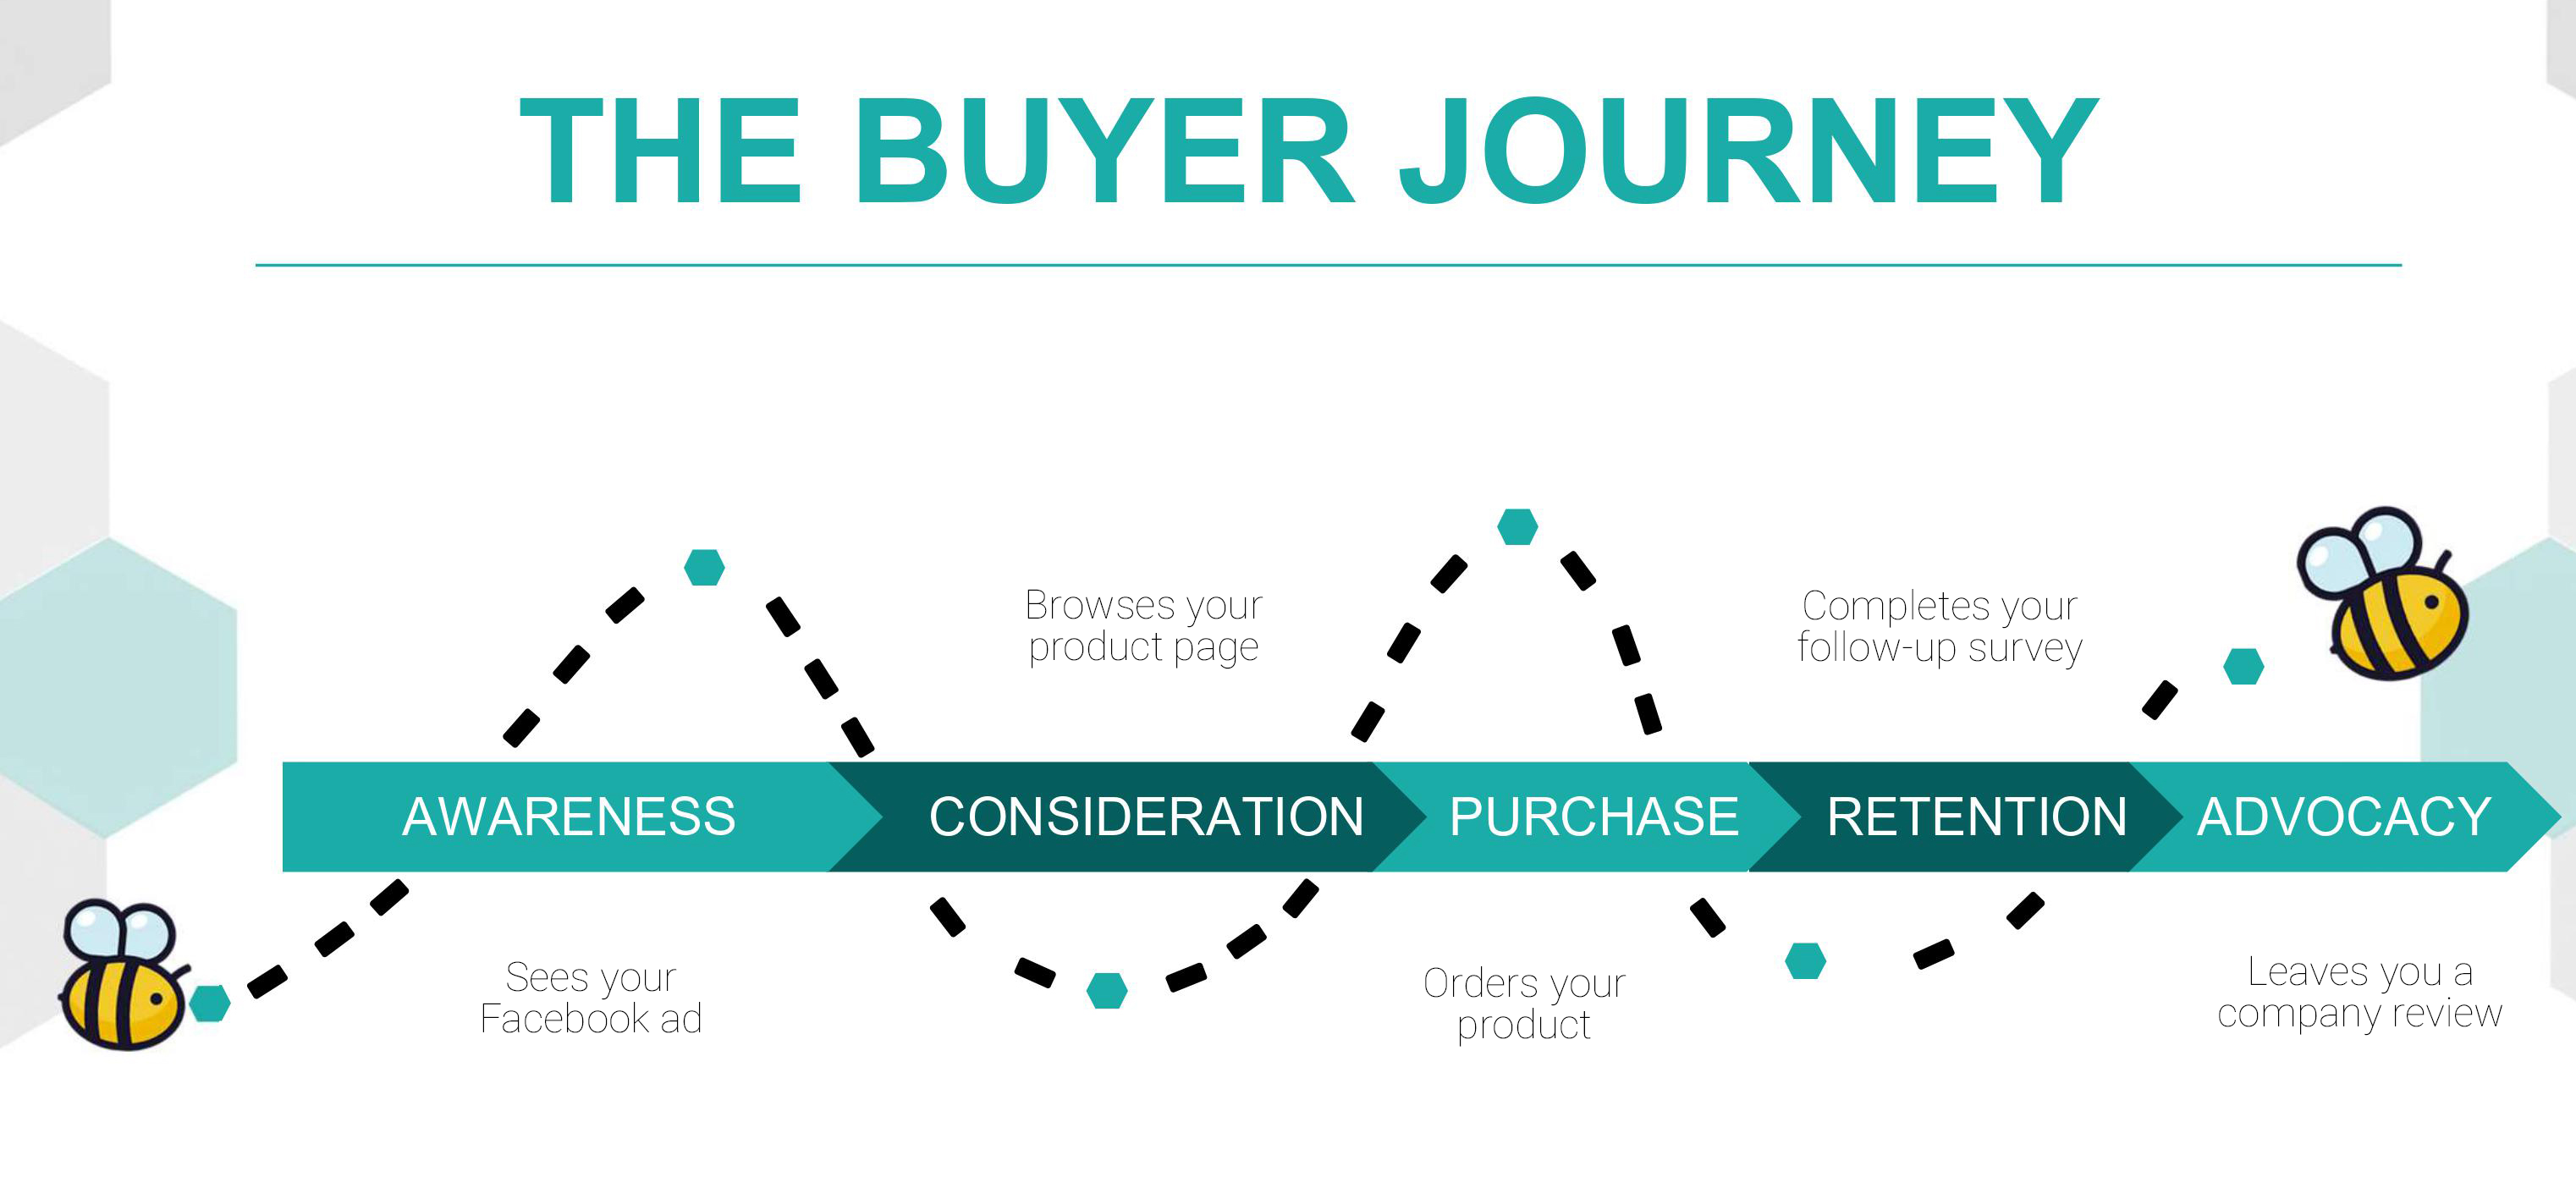 Graphic of the buyer journey with examples of the awareness, consideration, purchase, advocacy and retention stages